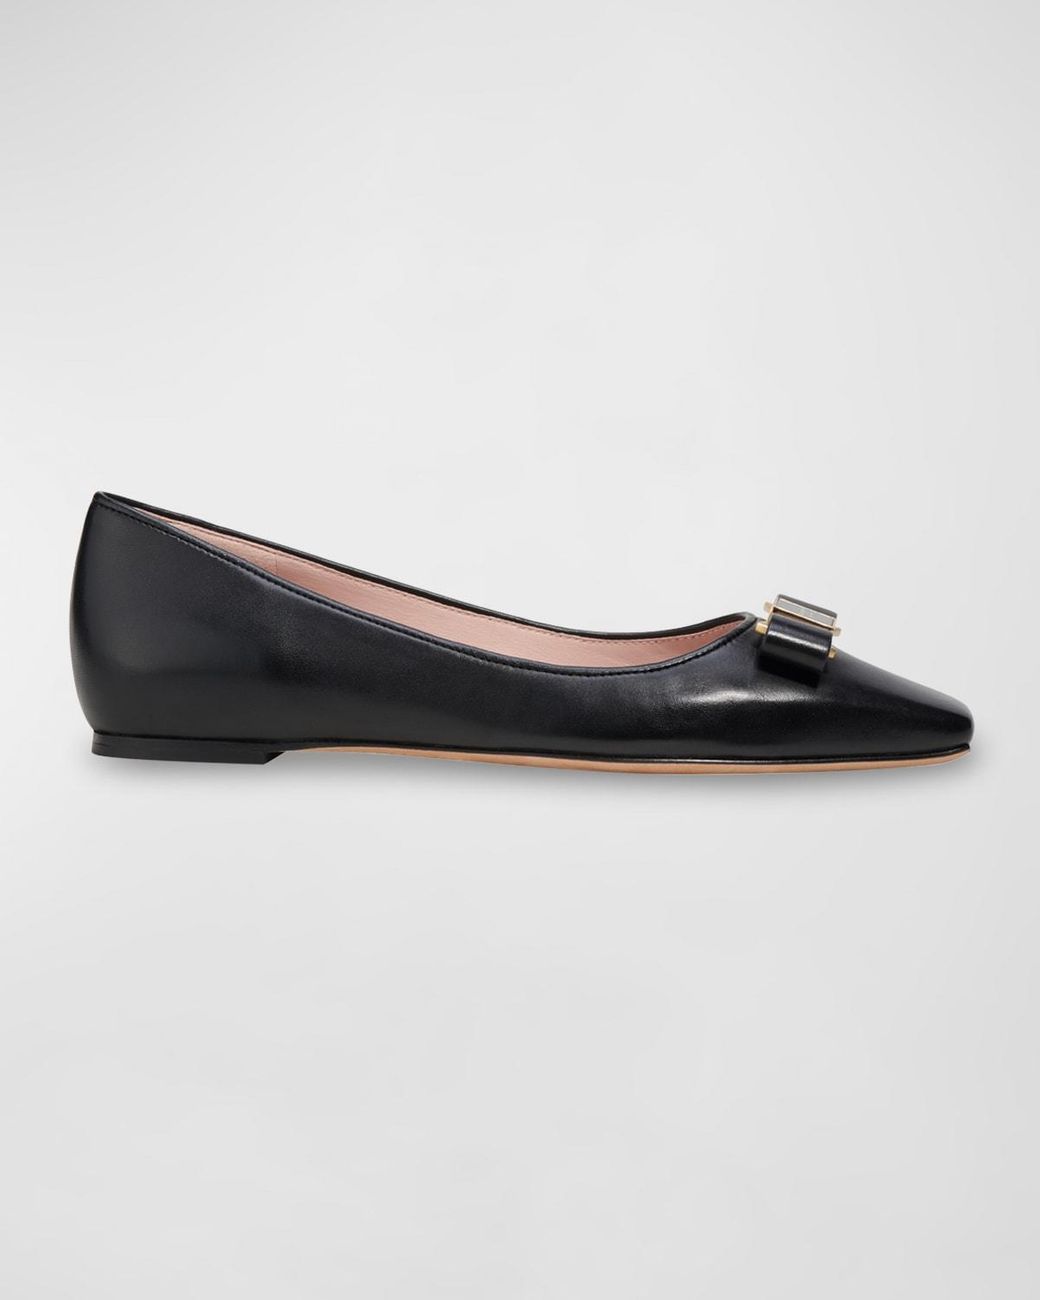 Kate Spade Bowdie Leather Ballerina Flats in Black | Lyst